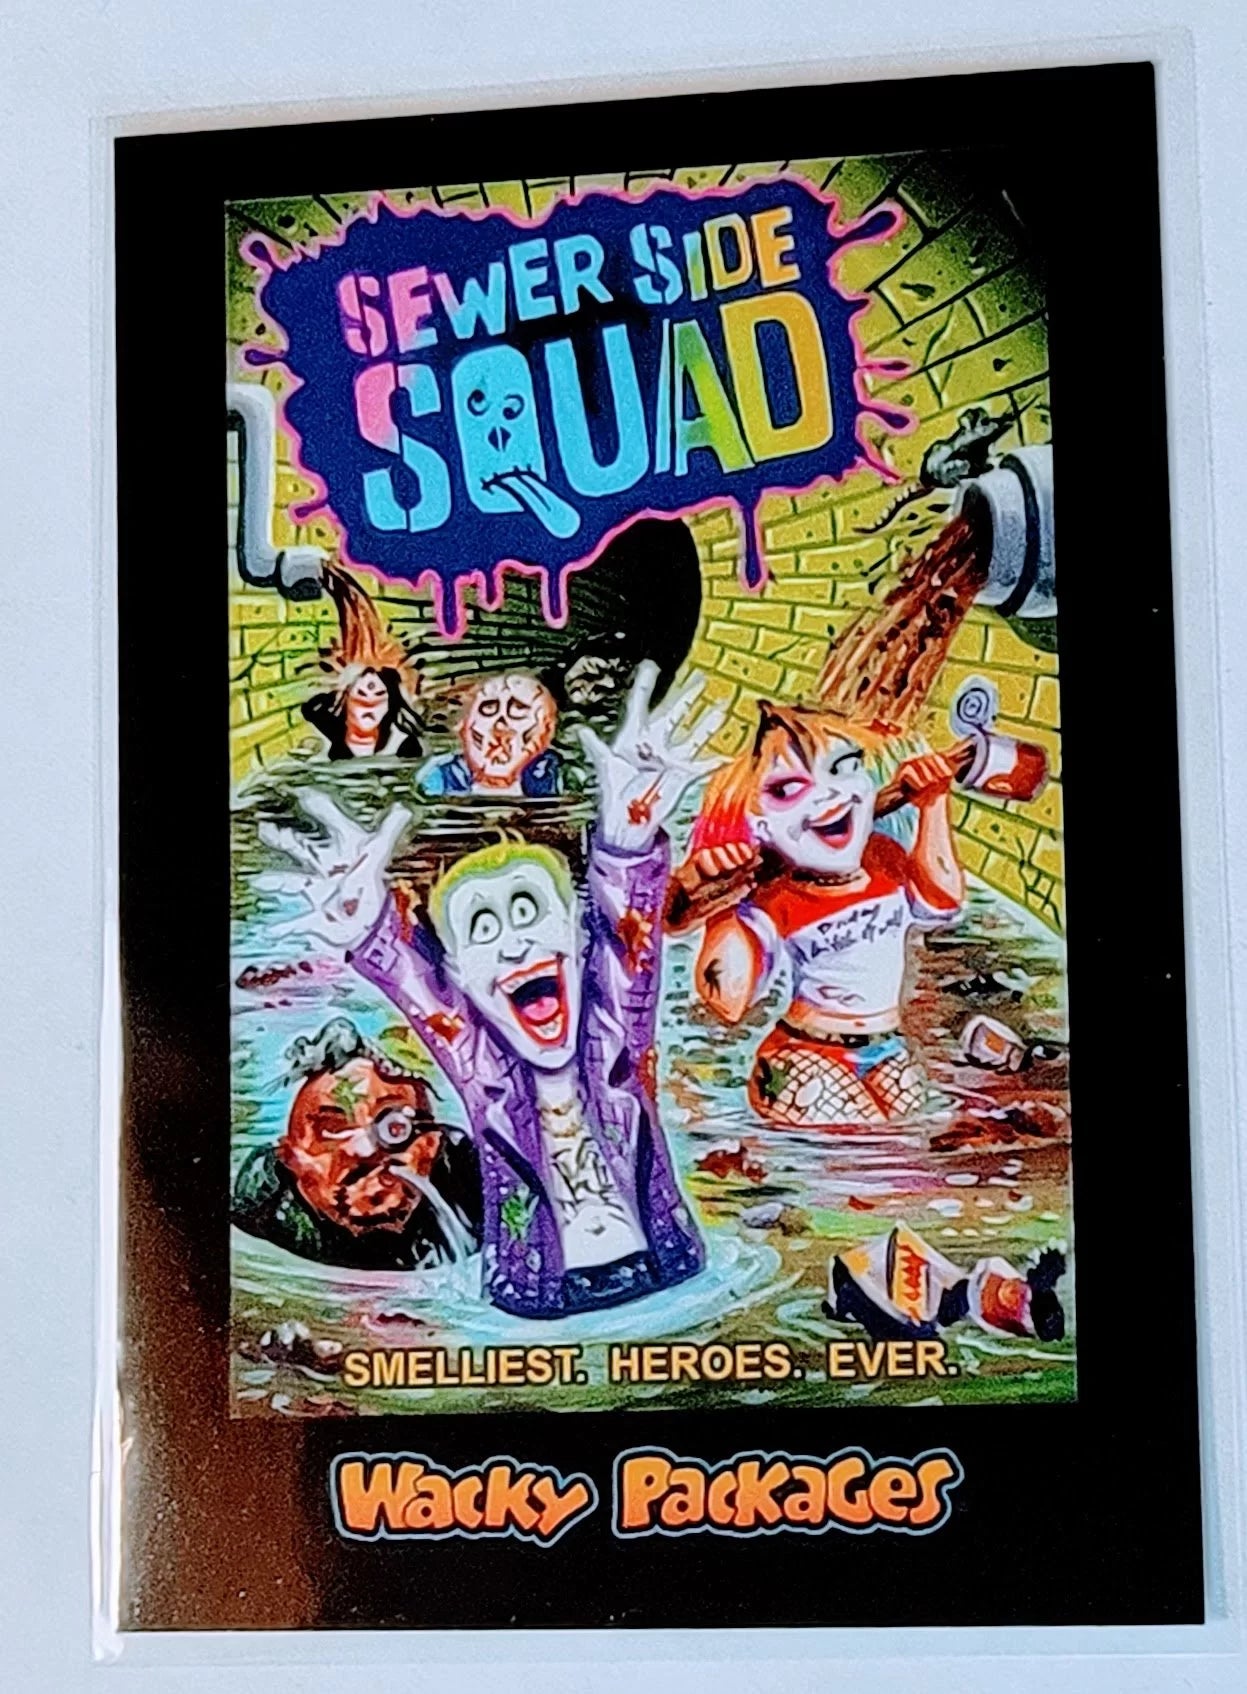 Sewer side squad, 2018 Topps Wacky Packages Go to the Movies Sewer Side Squad #10 Sticker Trading Card MCSC1 simple Xclusive Collectibles   